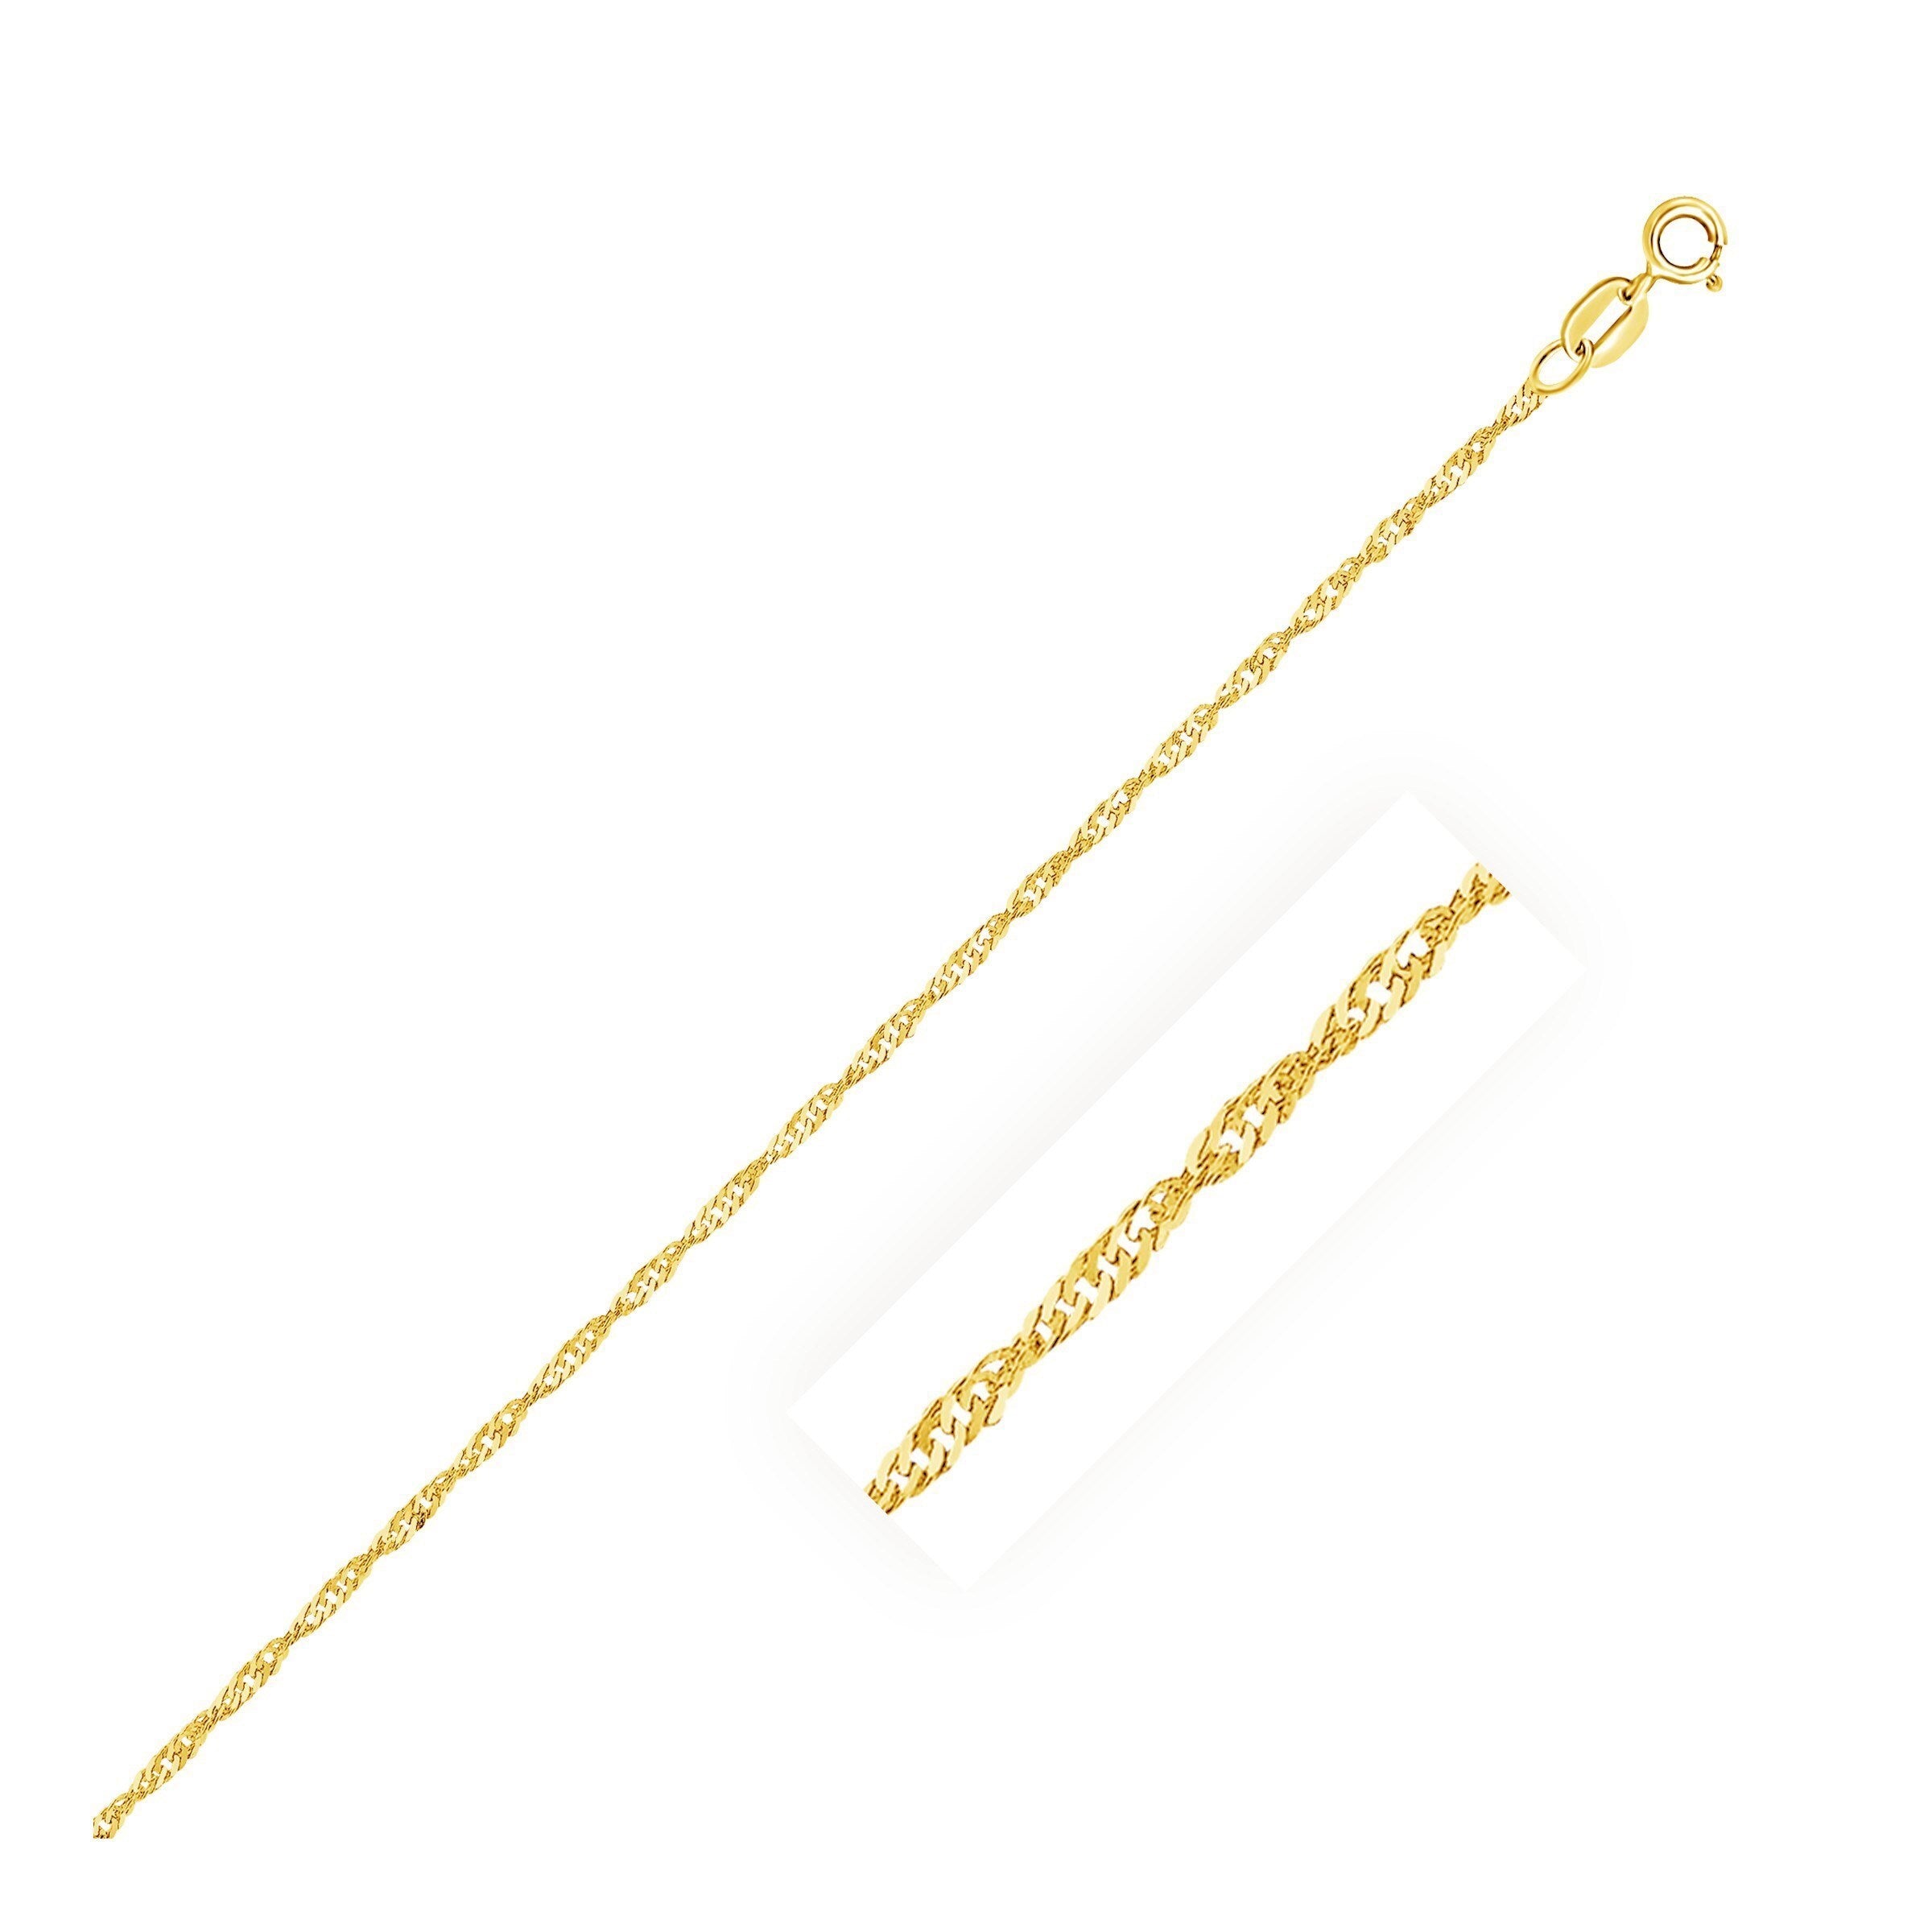 10k Yellow Gold Singapore Anklet 1.5mm, size 10''